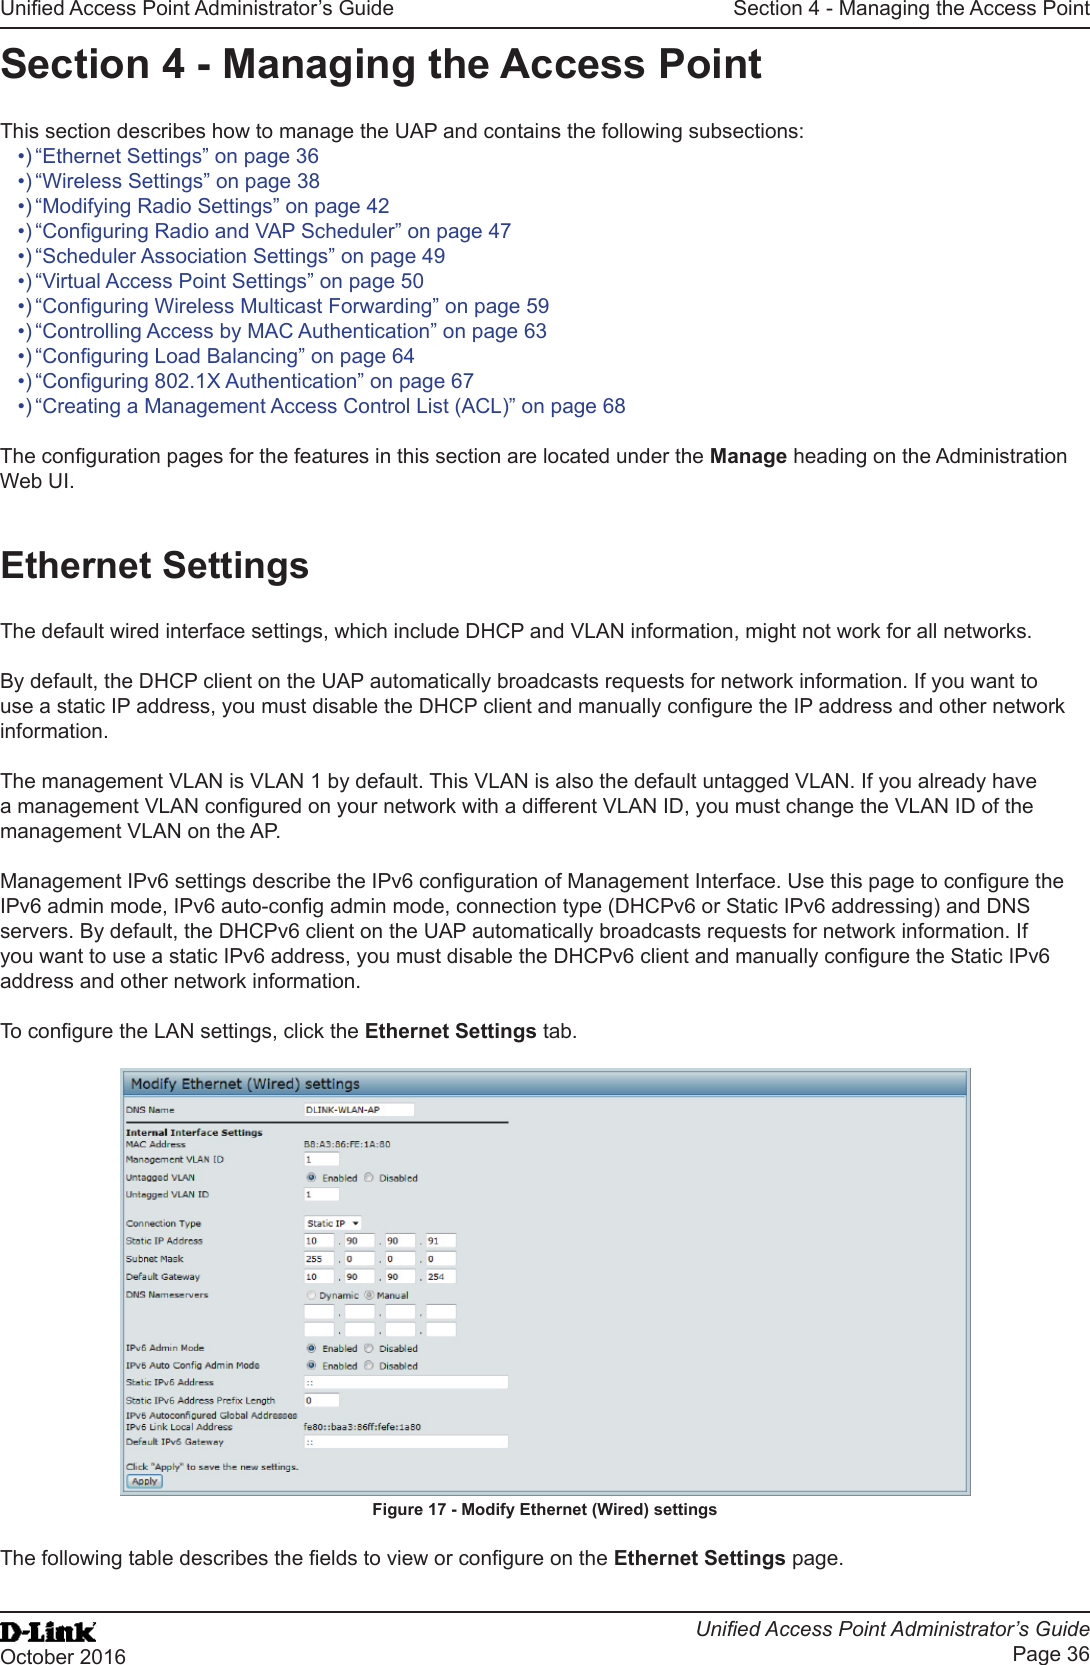 Unied Access Point Administrator’s GuideUnied Access Point Administrator’s GuidePage 36October 2016Section 4 - Managing the Access PointSection 4 - Managing the Access PointThis section describes how to manage the UAP and contains the following subsections:•) “Ethernet Settings” on page 36•) “Wireless Settings” on page 38•) “Modifying Radio Settings” on page 42•) “Conguring Radio and VAP Scheduler” on page 47•) “Scheduler Association Settings” on page 49•) “Virtual Access Point Settings” on page 50•) “Conguring Wireless Multicast Forwarding” on page 59•) “Controlling Access by MAC Authentication” on page 63•) “Conguring Load Balancing” on page 64•) “Conguring 802.1X Authentication” on page 67•) “Creating a Management Access Control List (ACL)” on page 68The conguration pages for the features in this section are located under the Manage heading on the Administration Web UI.Ethernet SettingsThe default wired interface settings, which include DHCP and VLAN information, might not work for all networks. By default, the DHCP client on the UAP automatically broadcasts requests for network information. If you want to use a static IP address, you must disable the DHCP client and manually congure the IP address and other network information.The management VLAN is VLAN 1 by default. This VLAN is also the default untagged VLAN. If you already have a management VLAN congured on your network with a different VLAN ID, you must change the VLAN ID of the management VLAN on the AP.Management IPv6 settings describe the IPv6 conguration of Management Interface. Use this page to congure the IPv6 admin mode, IPv6 auto-cong admin mode, connection type (DHCPv6 or Static IPv6 addressing) and DNS servers. By default, the DHCPv6 client on the UAP automatically broadcasts requests for network information. If you want to use a static IPv6 address, you must disable the DHCPv6 client and manually congure the Static IPv6 address and other network information.To congure the LAN settings, click the Ethernet Settings tab.Figure 17 - Modify Ethernet (Wired) settingsThe following table describes the elds to view or congure on the Ethernet Settings page.